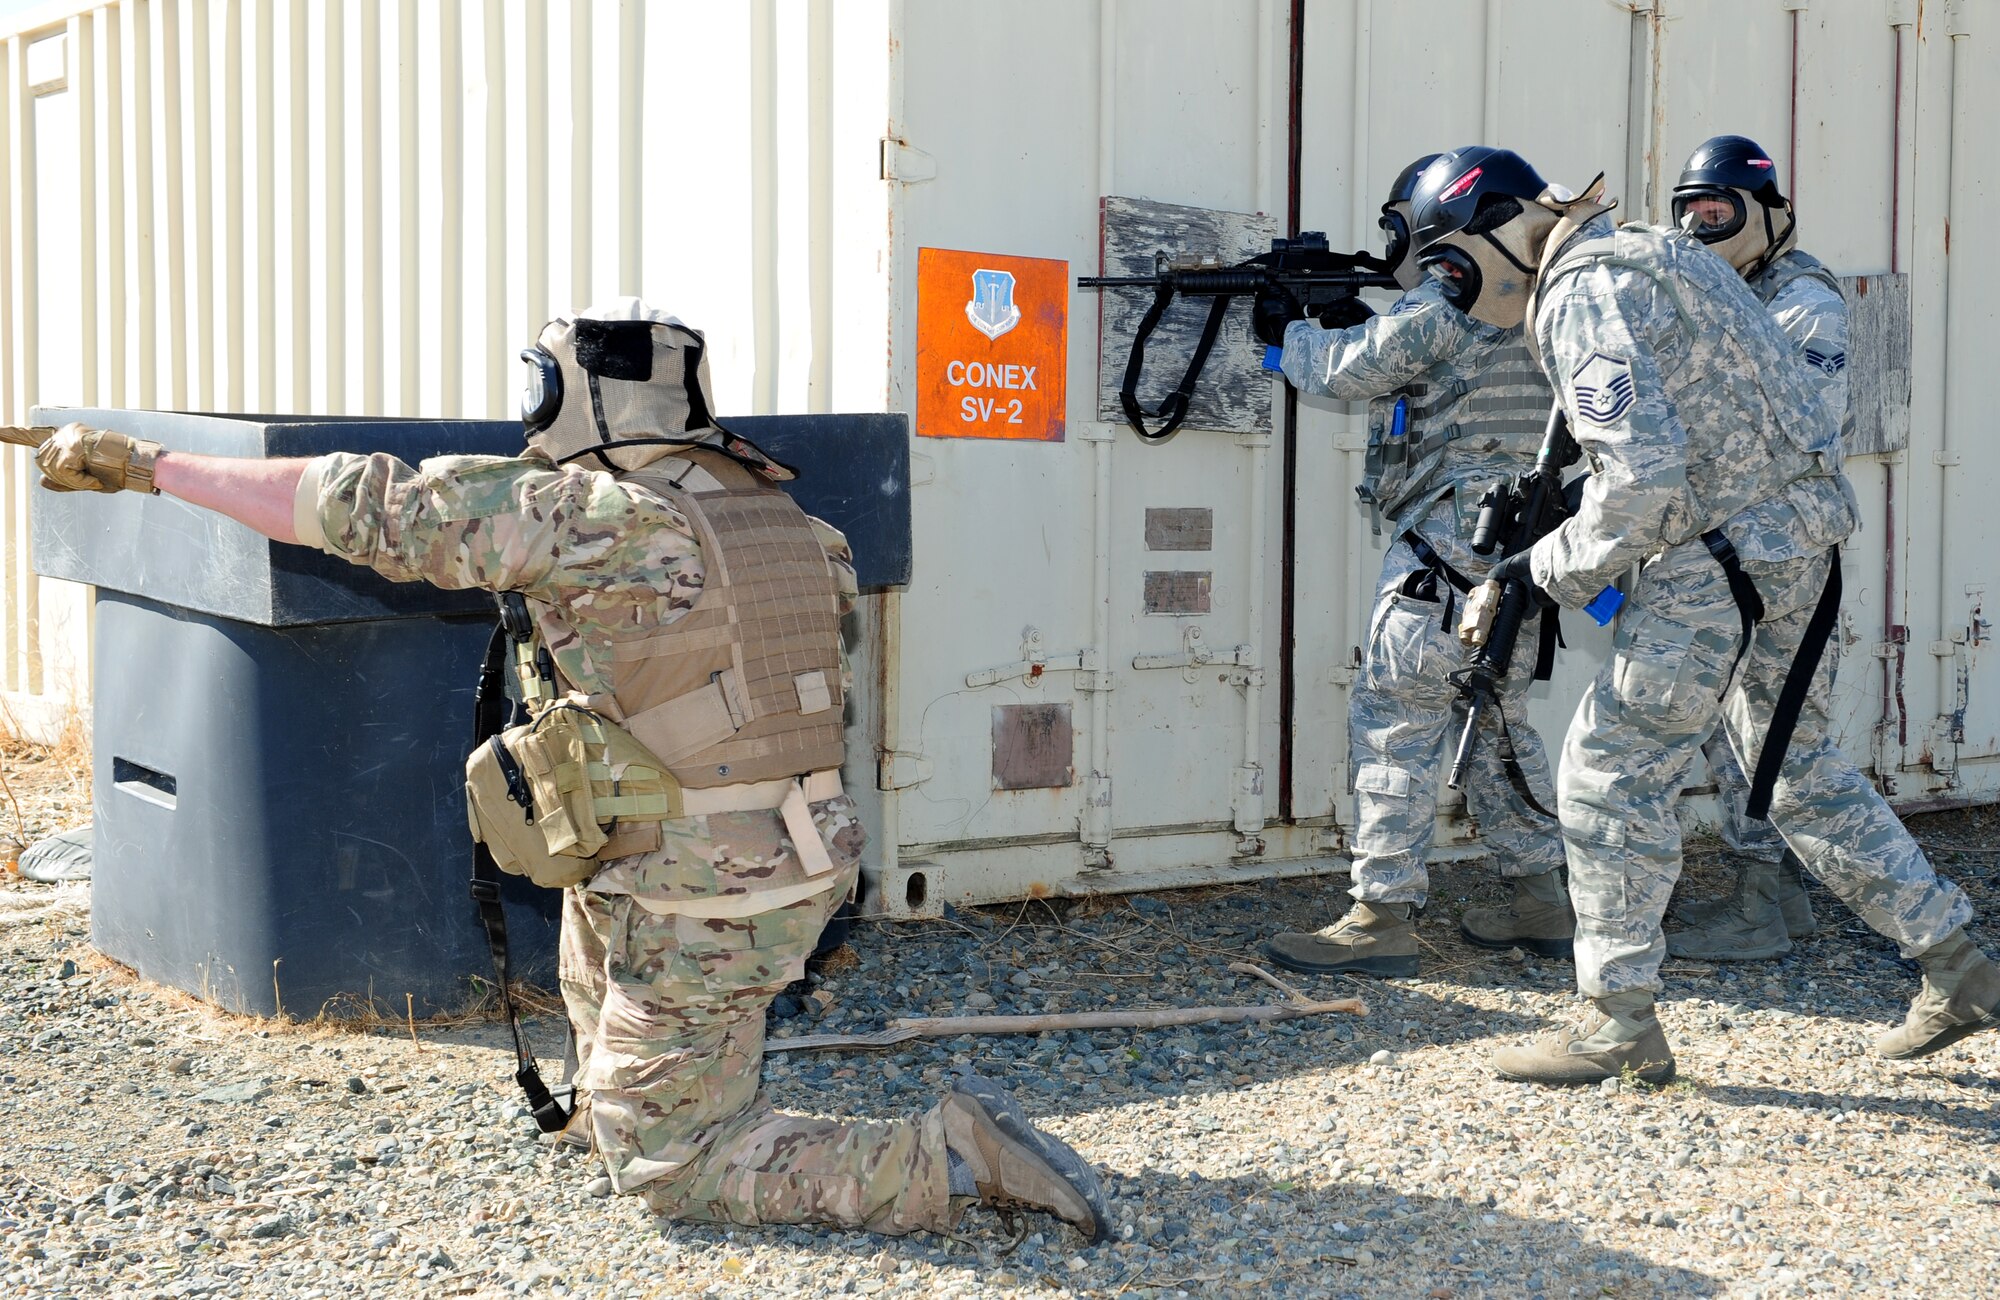 An Air Force contractor identifies a simulated enemy target while Airmen from the 9th Security Forces Squadron prepare to engage the threat. Contractors served as the subject matter experts during a pilot-rescue exercise, providing valuable insight to the Airmen. (U.S. Air Force photo by Airman 1st Class Bobby Cummings/Released)